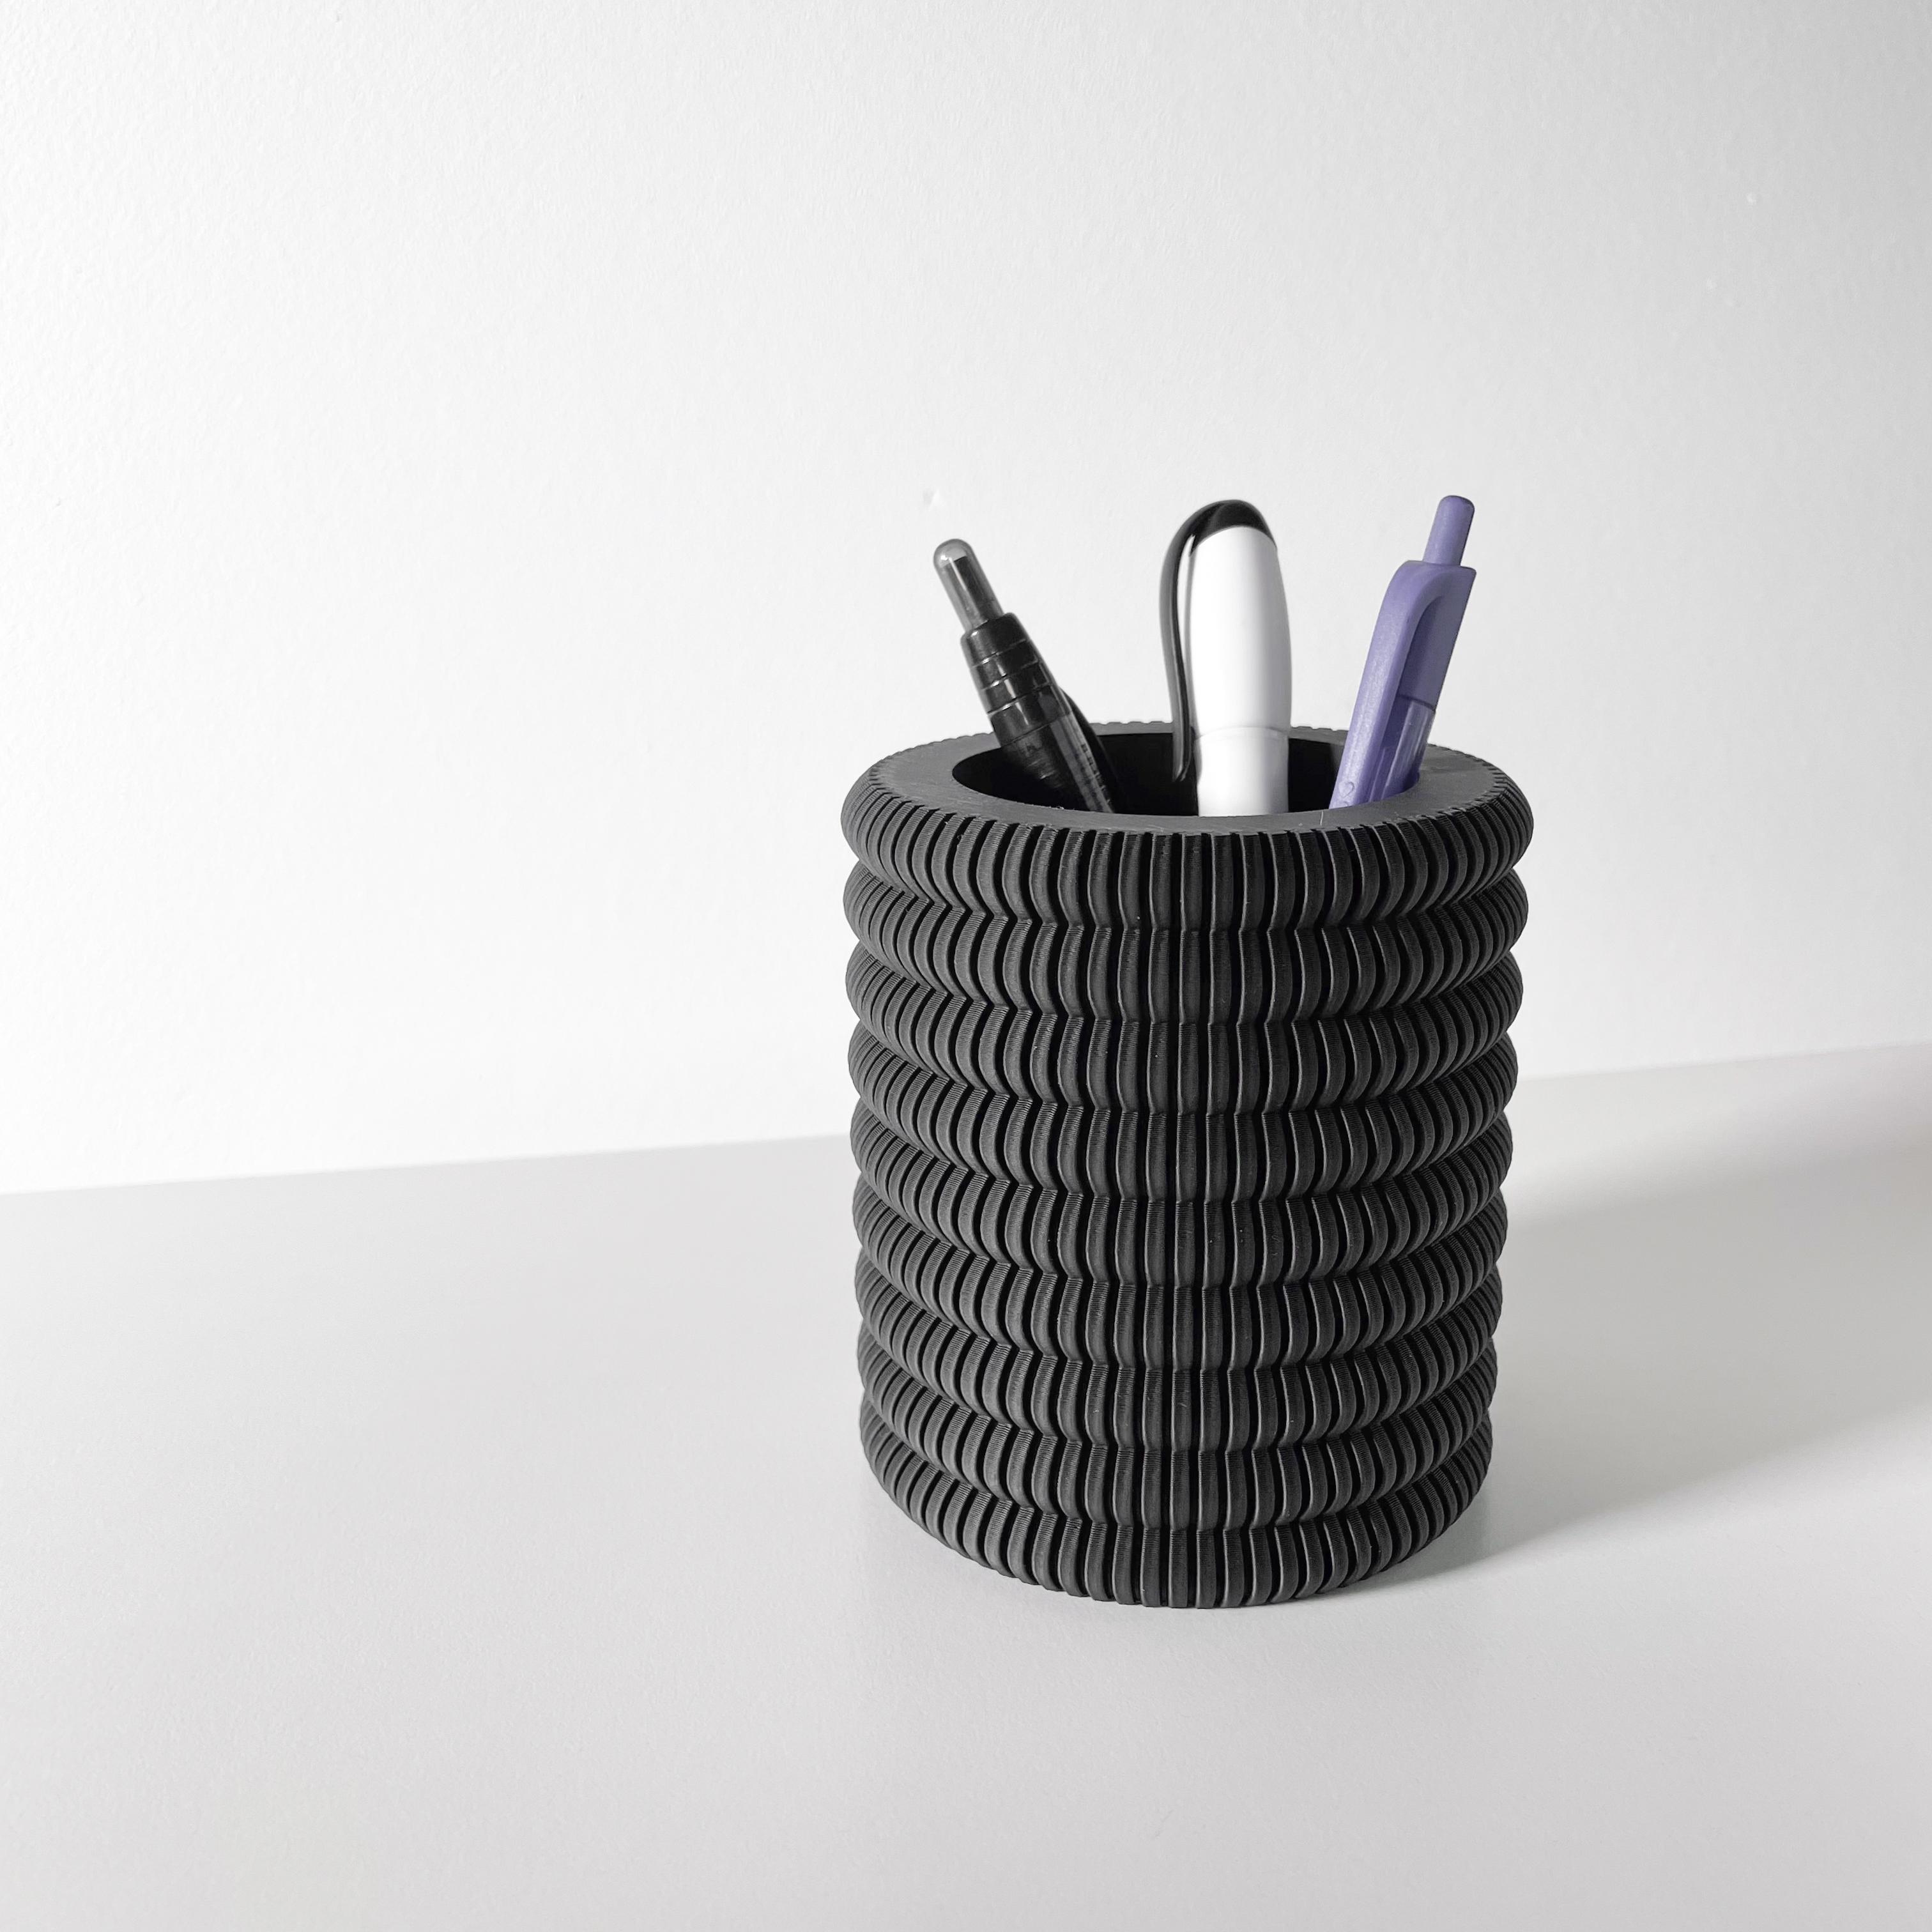 The Lonu Pen Holder | Desk Organizer and Pencil Cup Holder | Modern Office and Home Decor 3d model